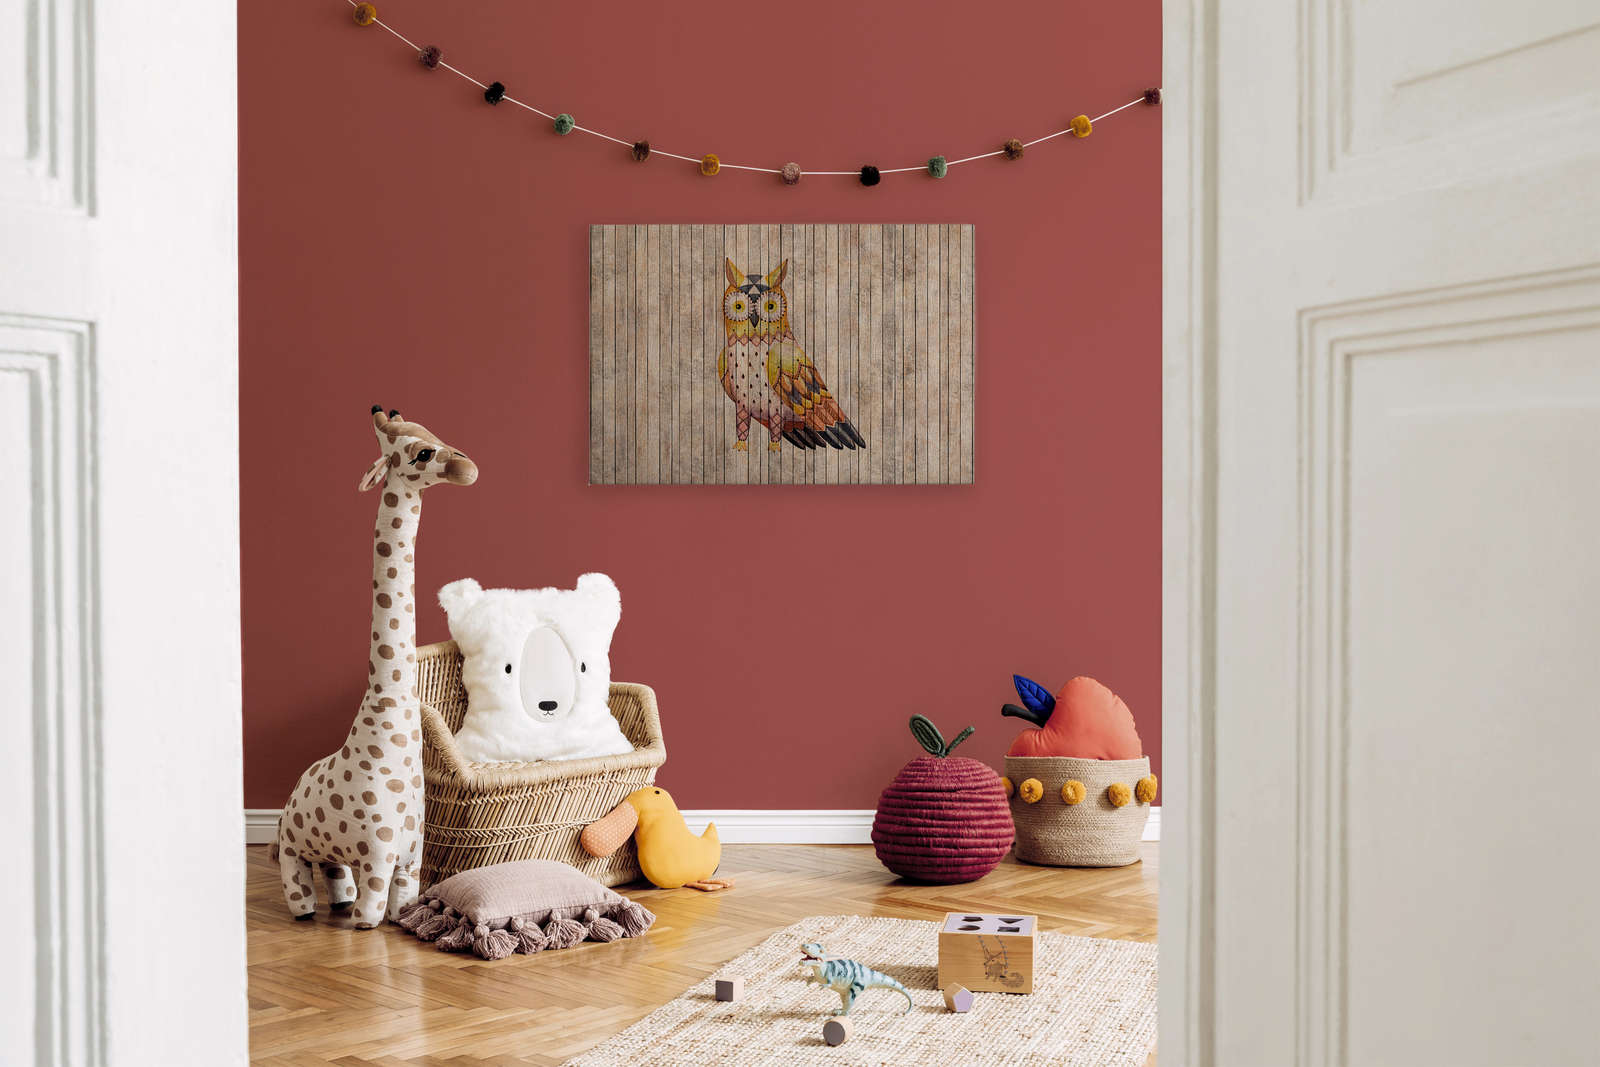             Fairy tale 1 - Wooden board wall with owl canvas picture - 0.90 m x 0.60 m
        